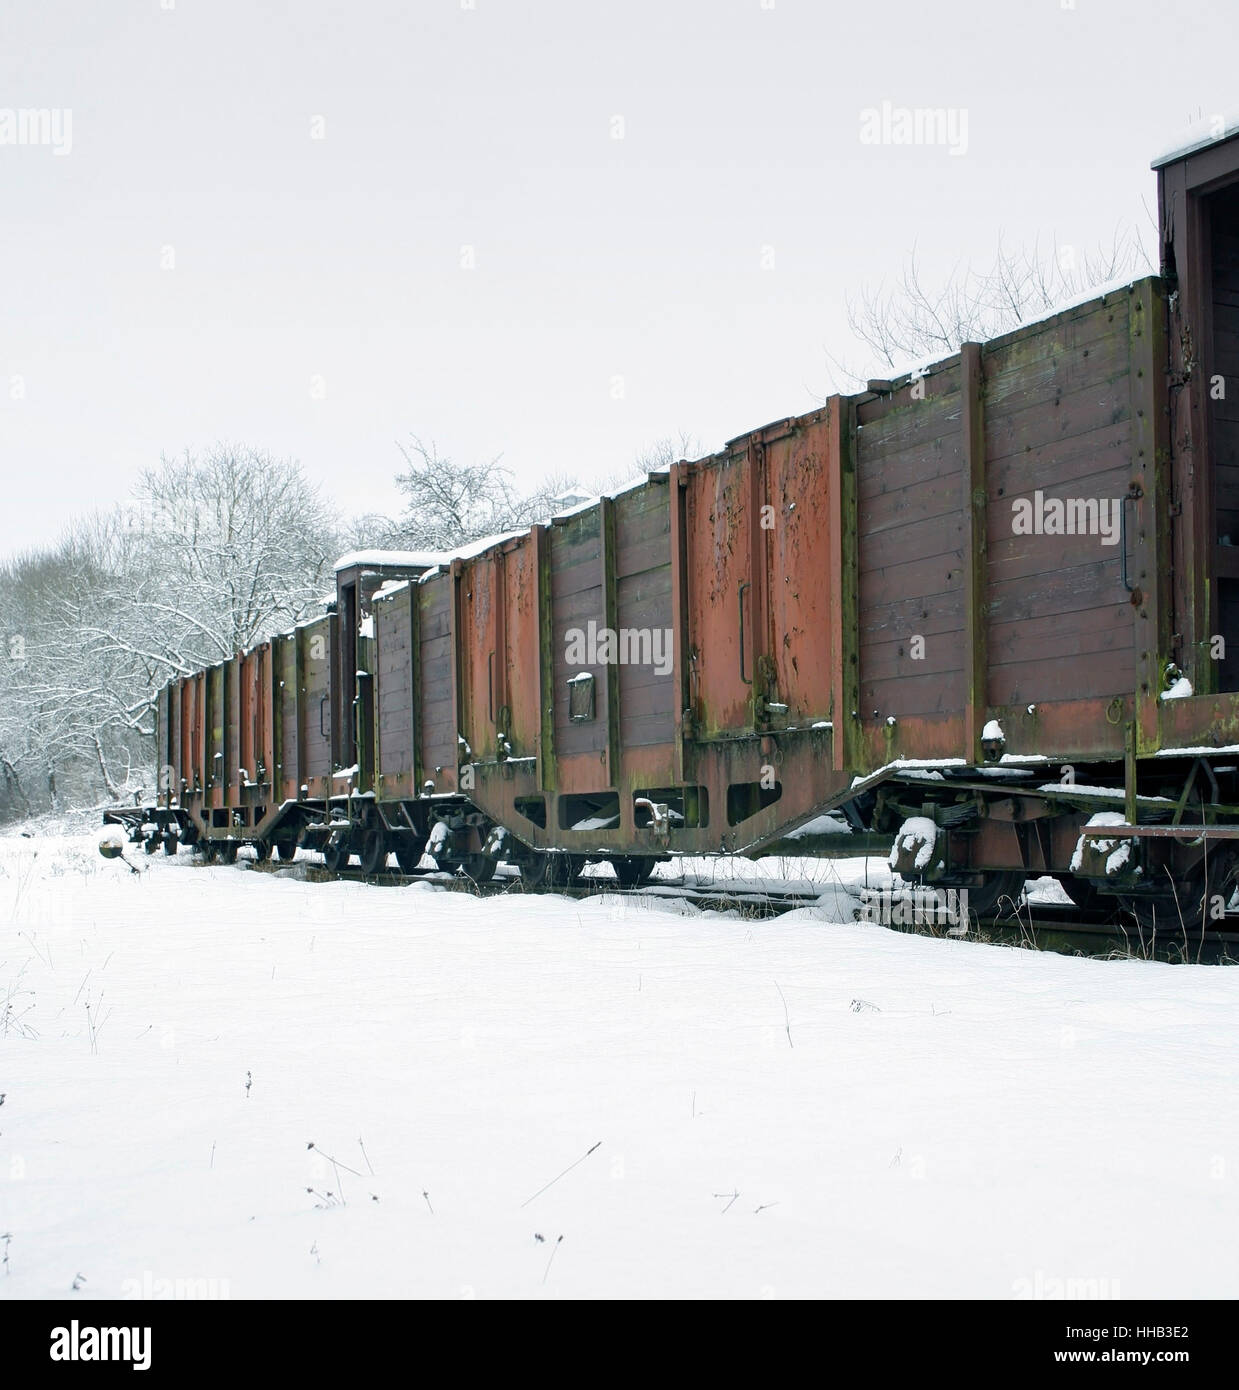 outdoor shot of a old railway car in Southern Germany at winter time Stock Photo